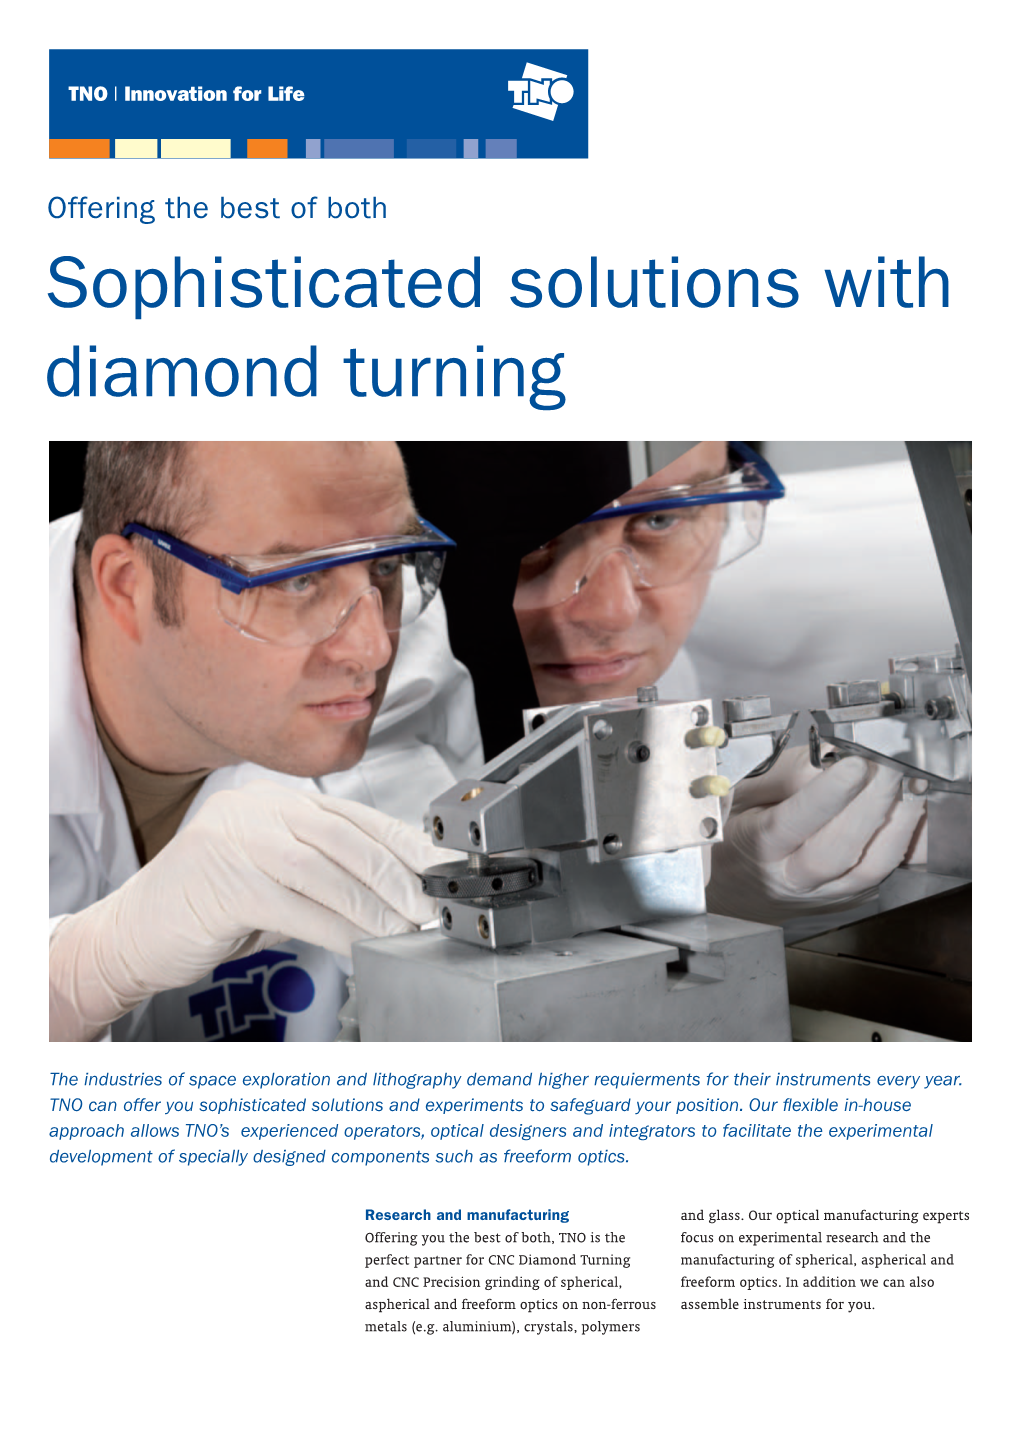 Sophisticated Solutions with Diamond Turning